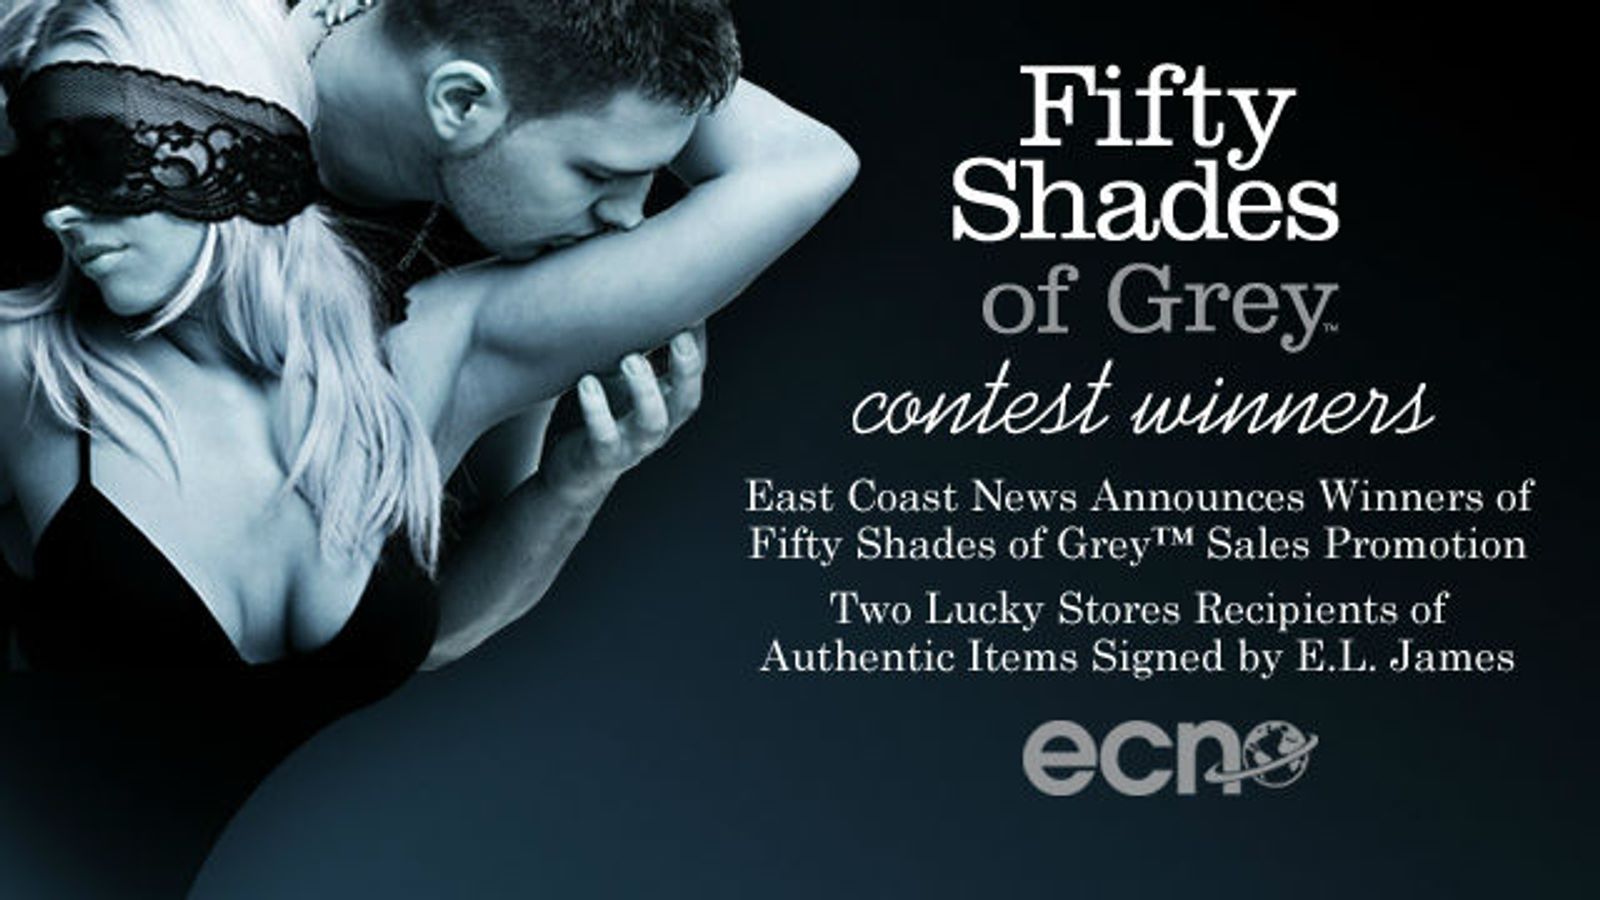 East Coast News Picks Winners of 'Fifty Shades' Sales Promotion